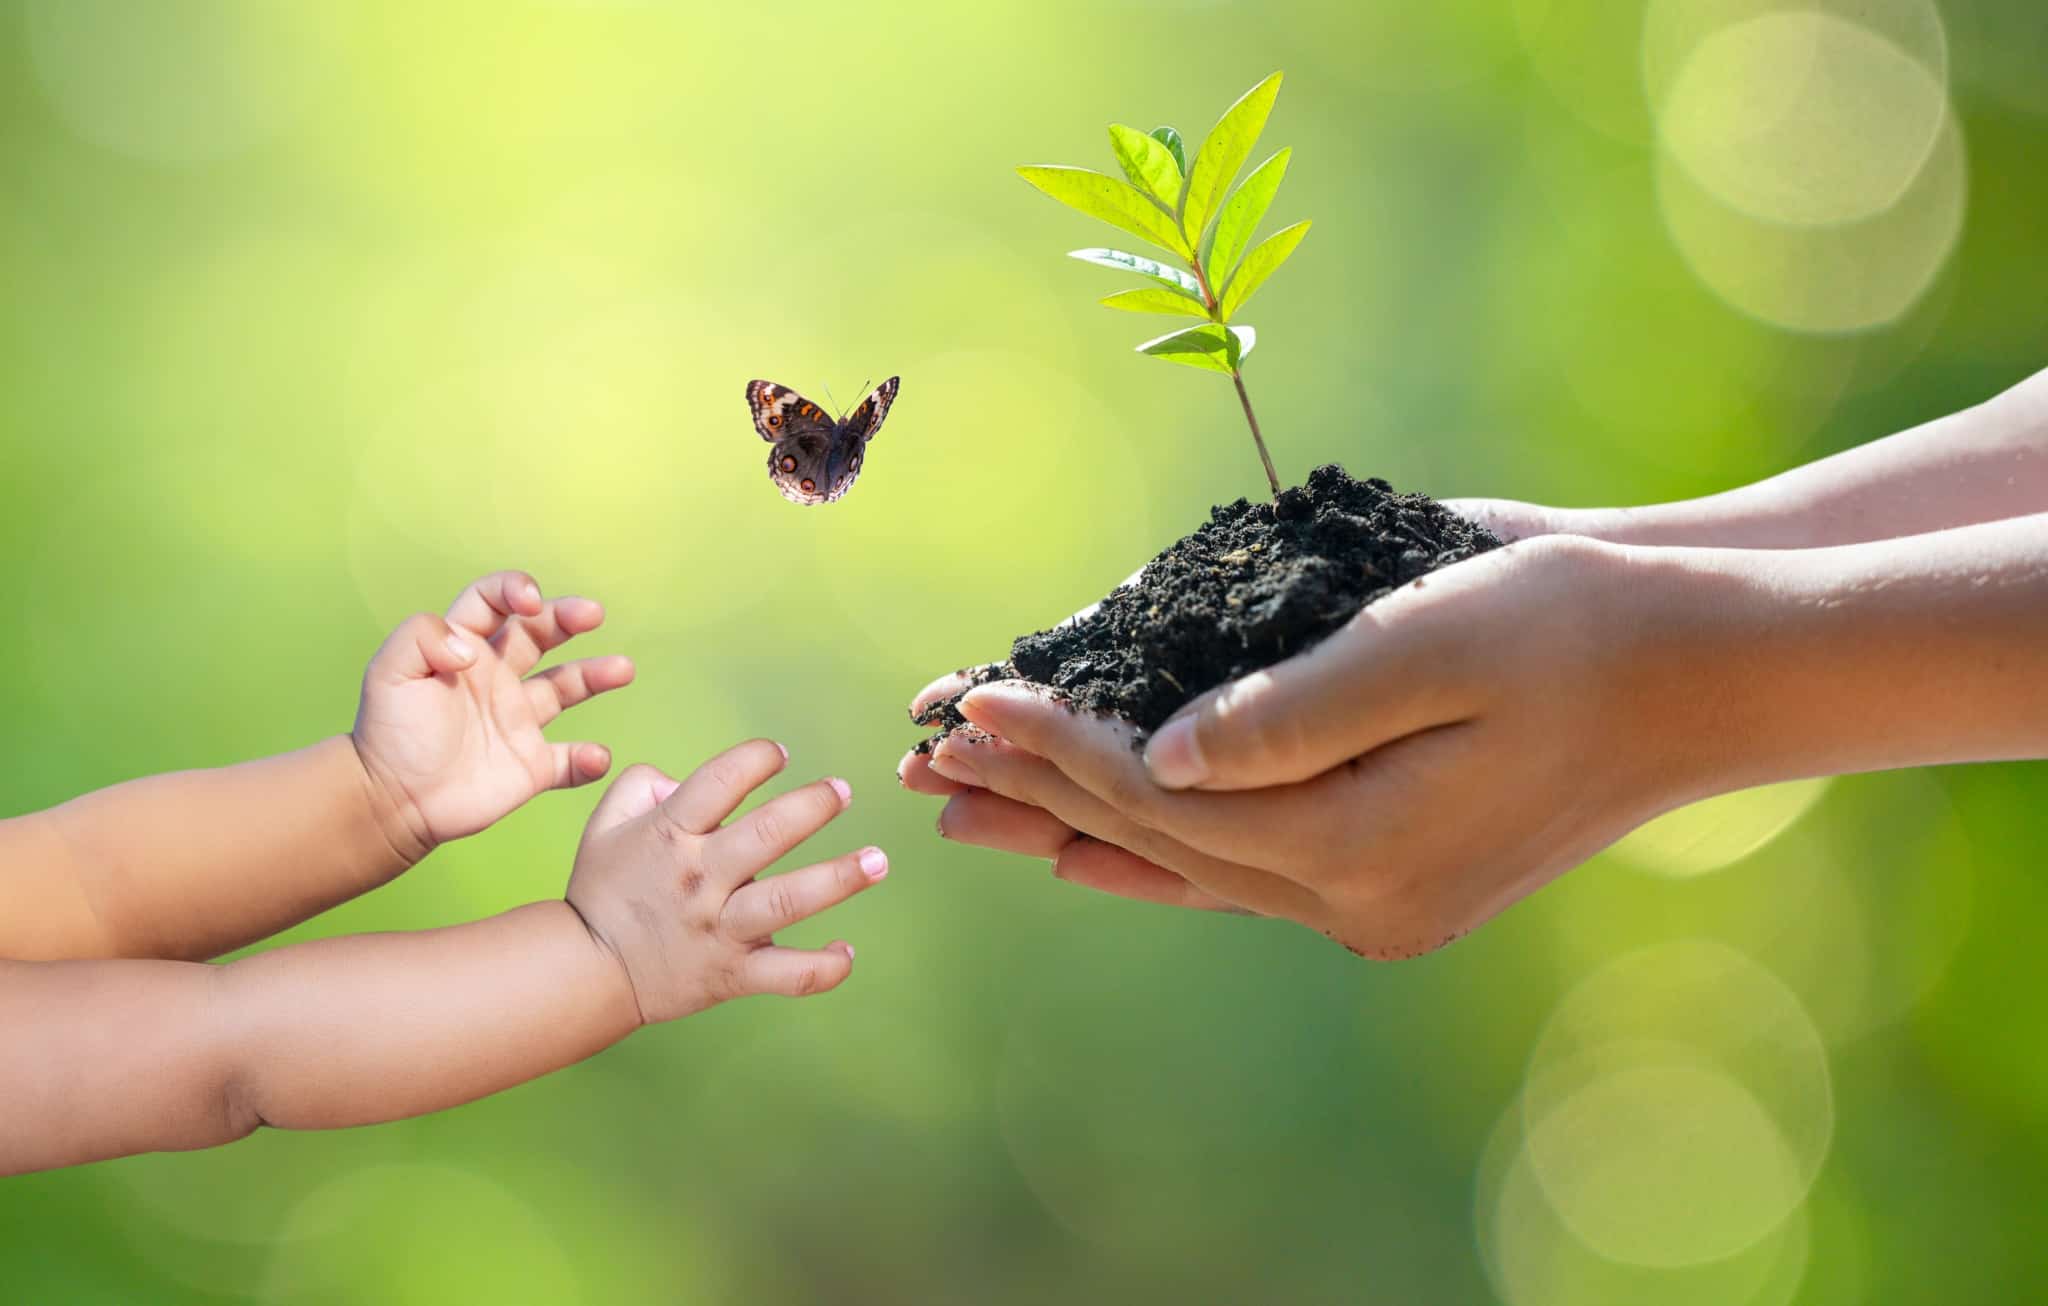 illustrative photographic production.  Green background and focus on an adult's hands with a handful of earth towards a child's hands